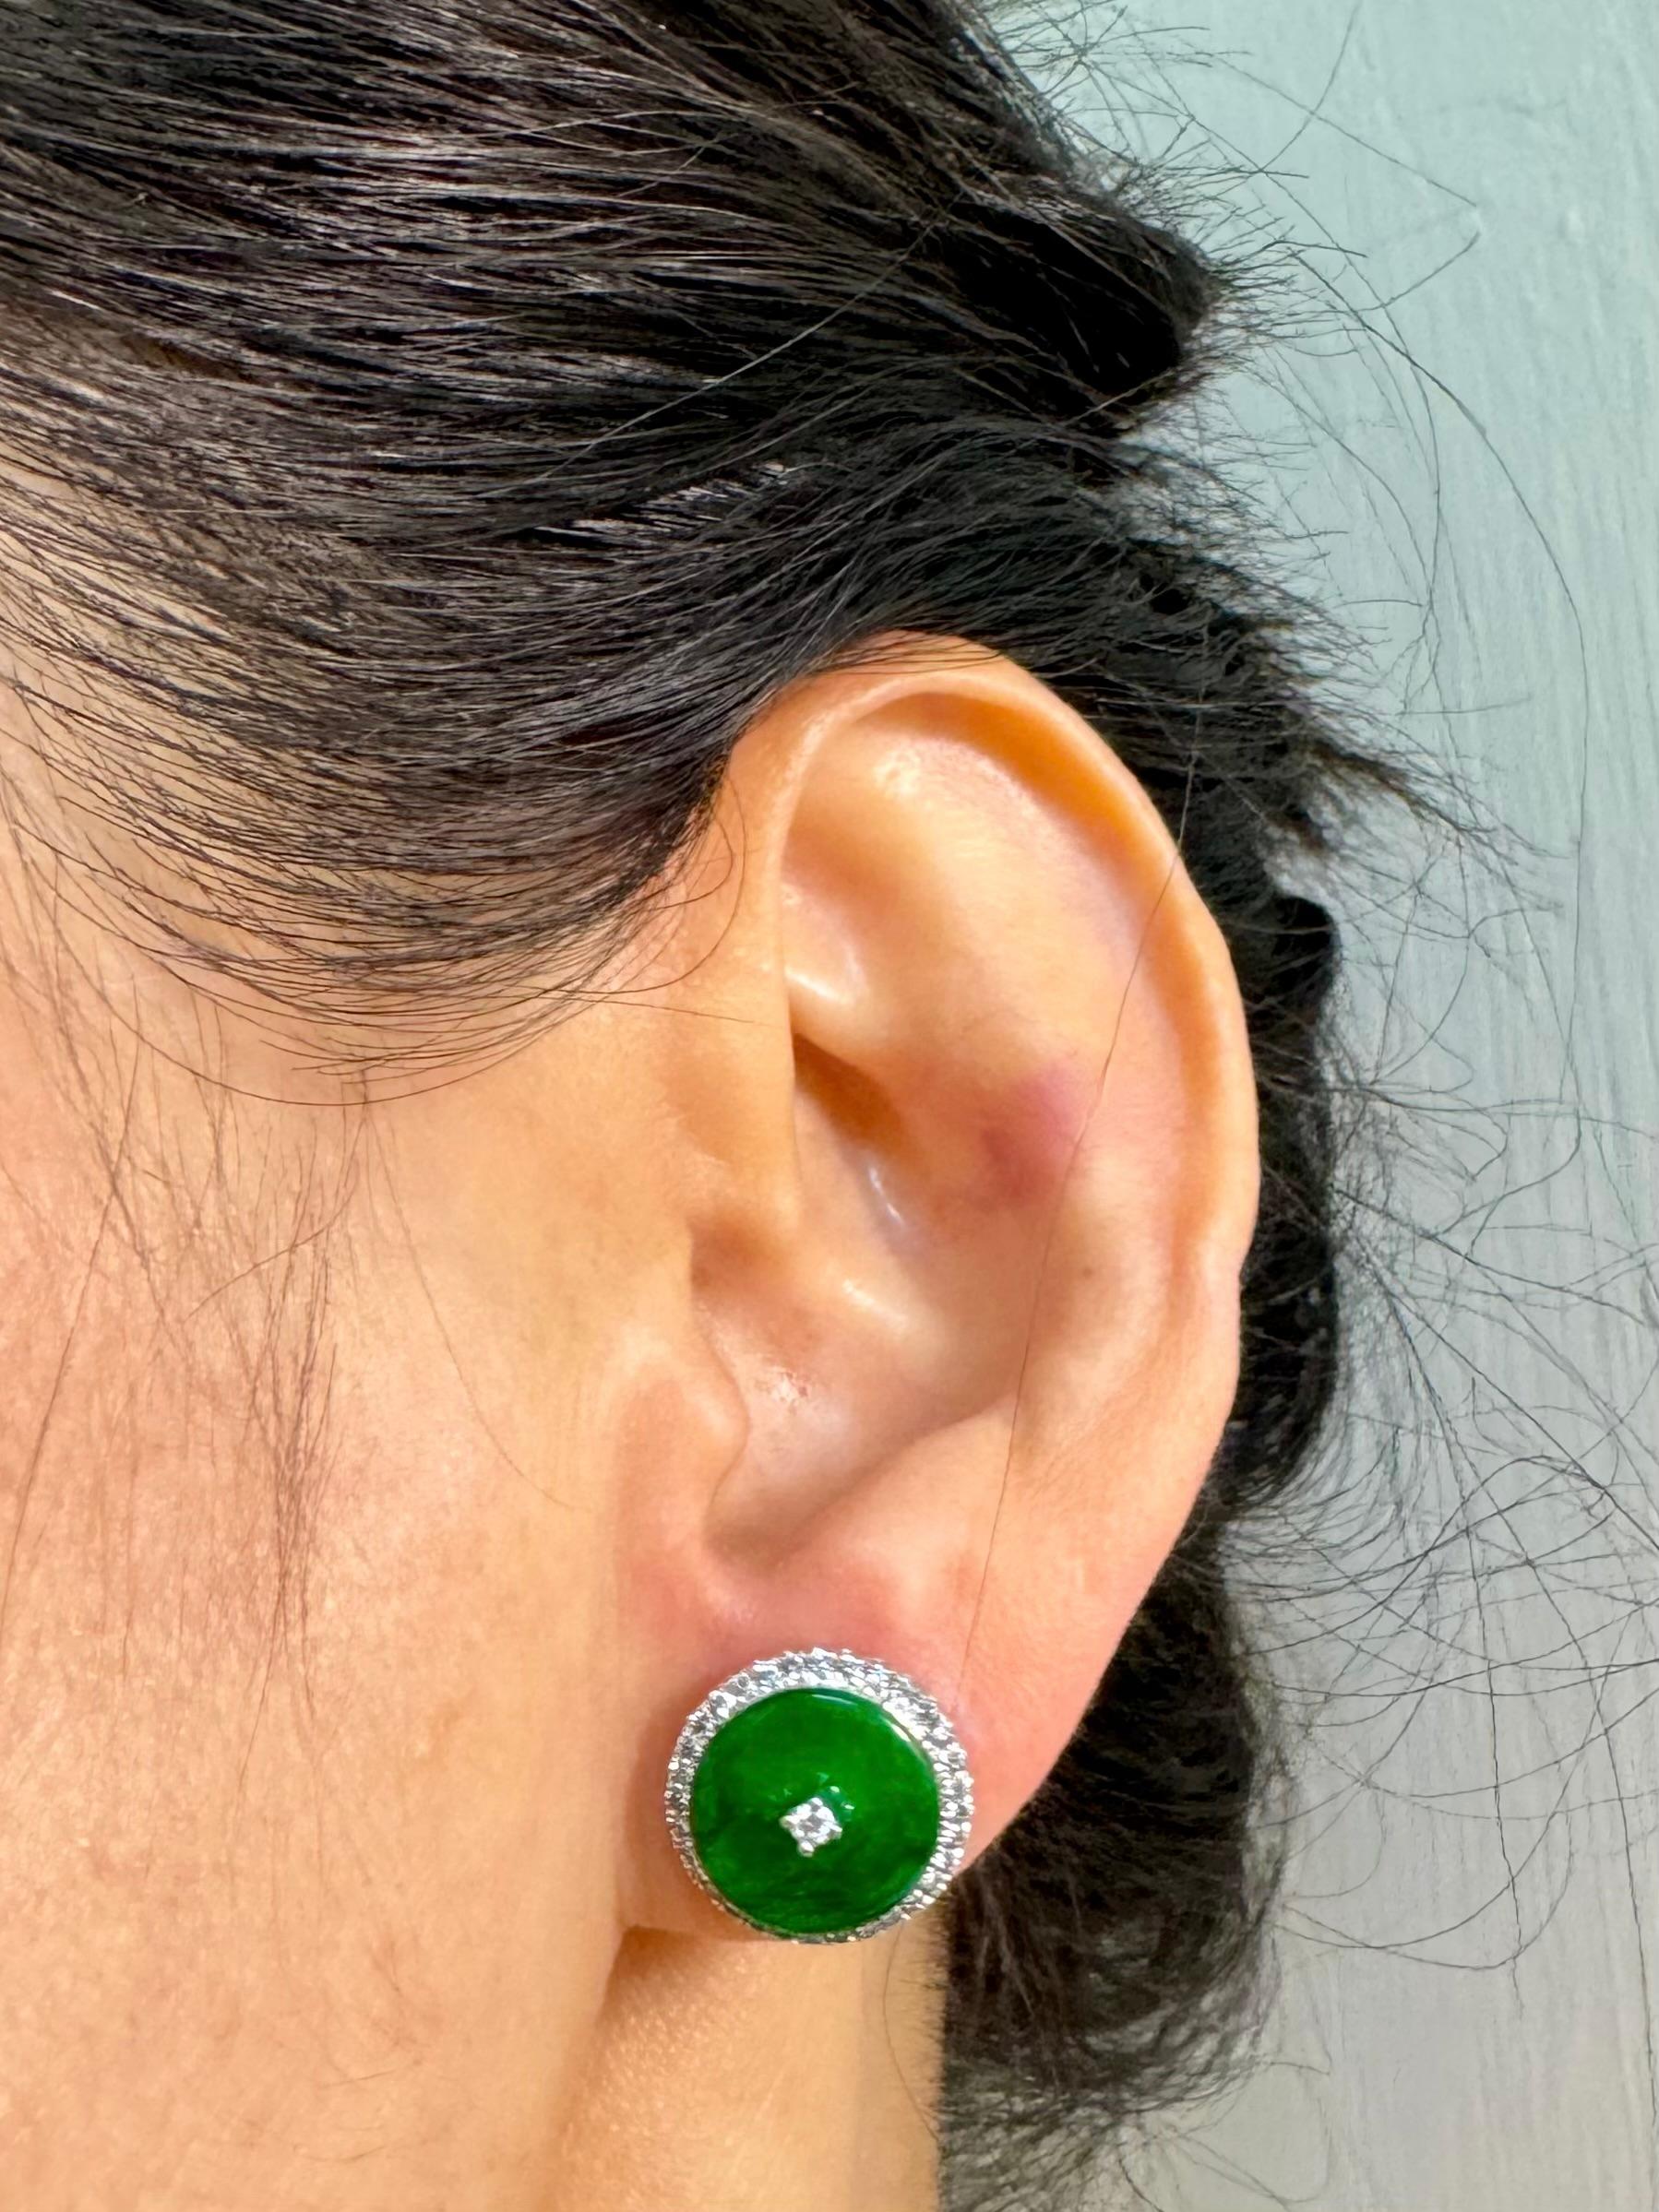 Please check out the HD video! Here is a nice pair of apple green Jade earrings. The diameter is about 13.8mm each. The earrings are set in 18k white gold and diamonds. There are approximately 0.45Cts of white diamonds that make up the halo. The